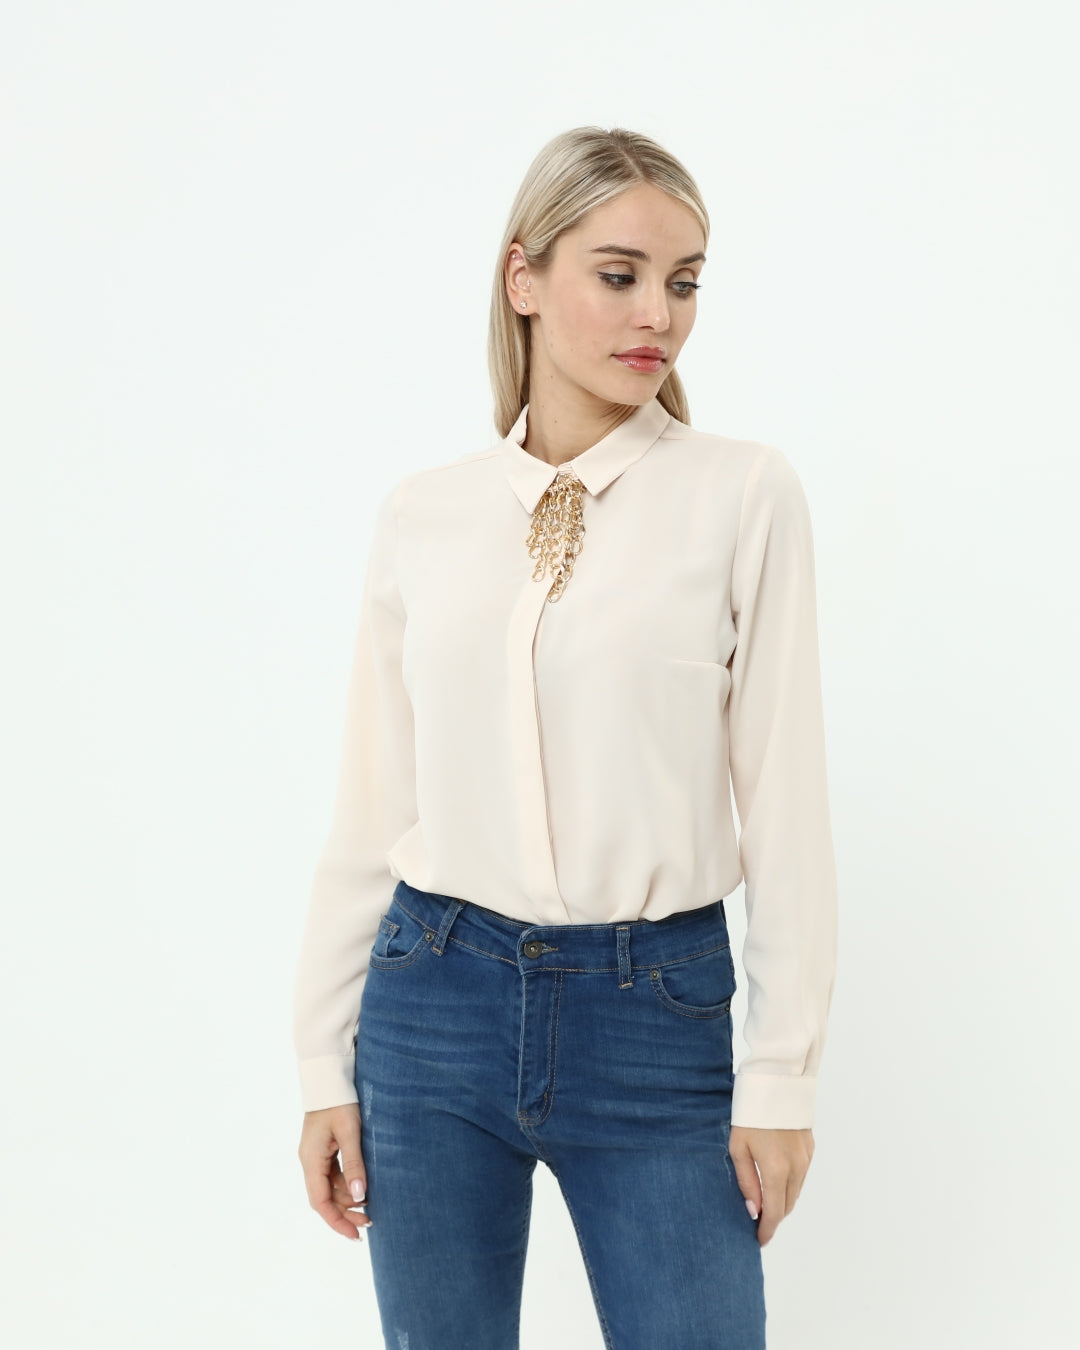 VANITY Limited Edition - Chain Ivory Shirt